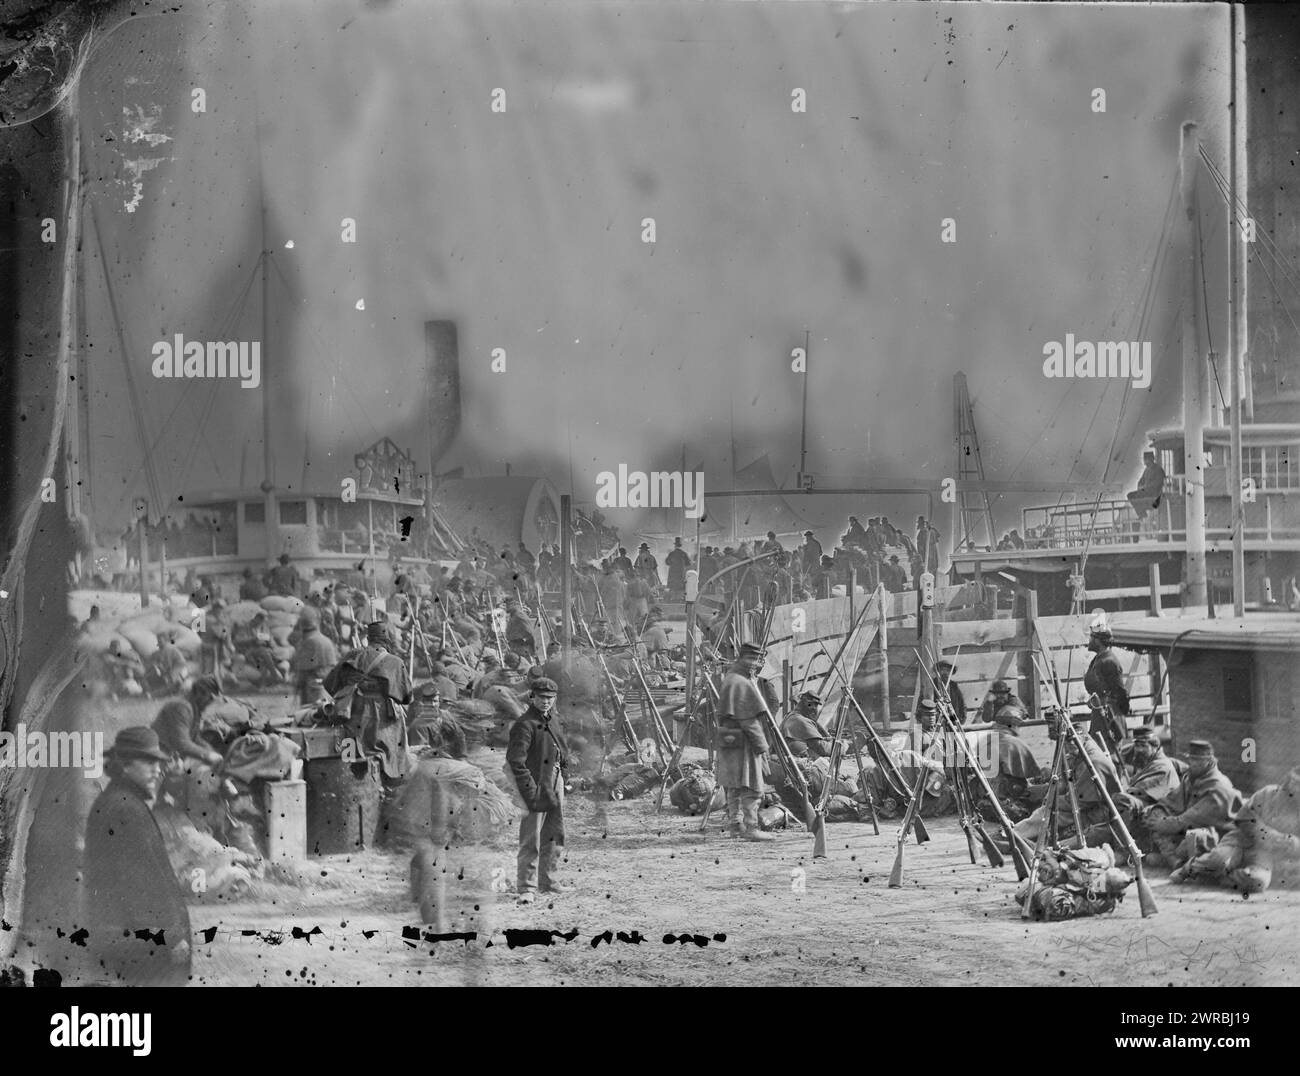 Aquia Creek Landing, Va. Embarkation of 9th Army Corps for Fort Monroe, Photograph from the main eastern theater of war, Burnside and Hooker, November 1862-April 1863., Gardner, Alexander, 1821-1882, photographer, 1863 February., United States, History, Civil War, 1861-1865, Equipment and supplies, Glass negatives, 1860-1870, Stereographs, 1860-1870, 1 negative: glass, stereograph, wet collodion, 4 x 10 in Stock Photo